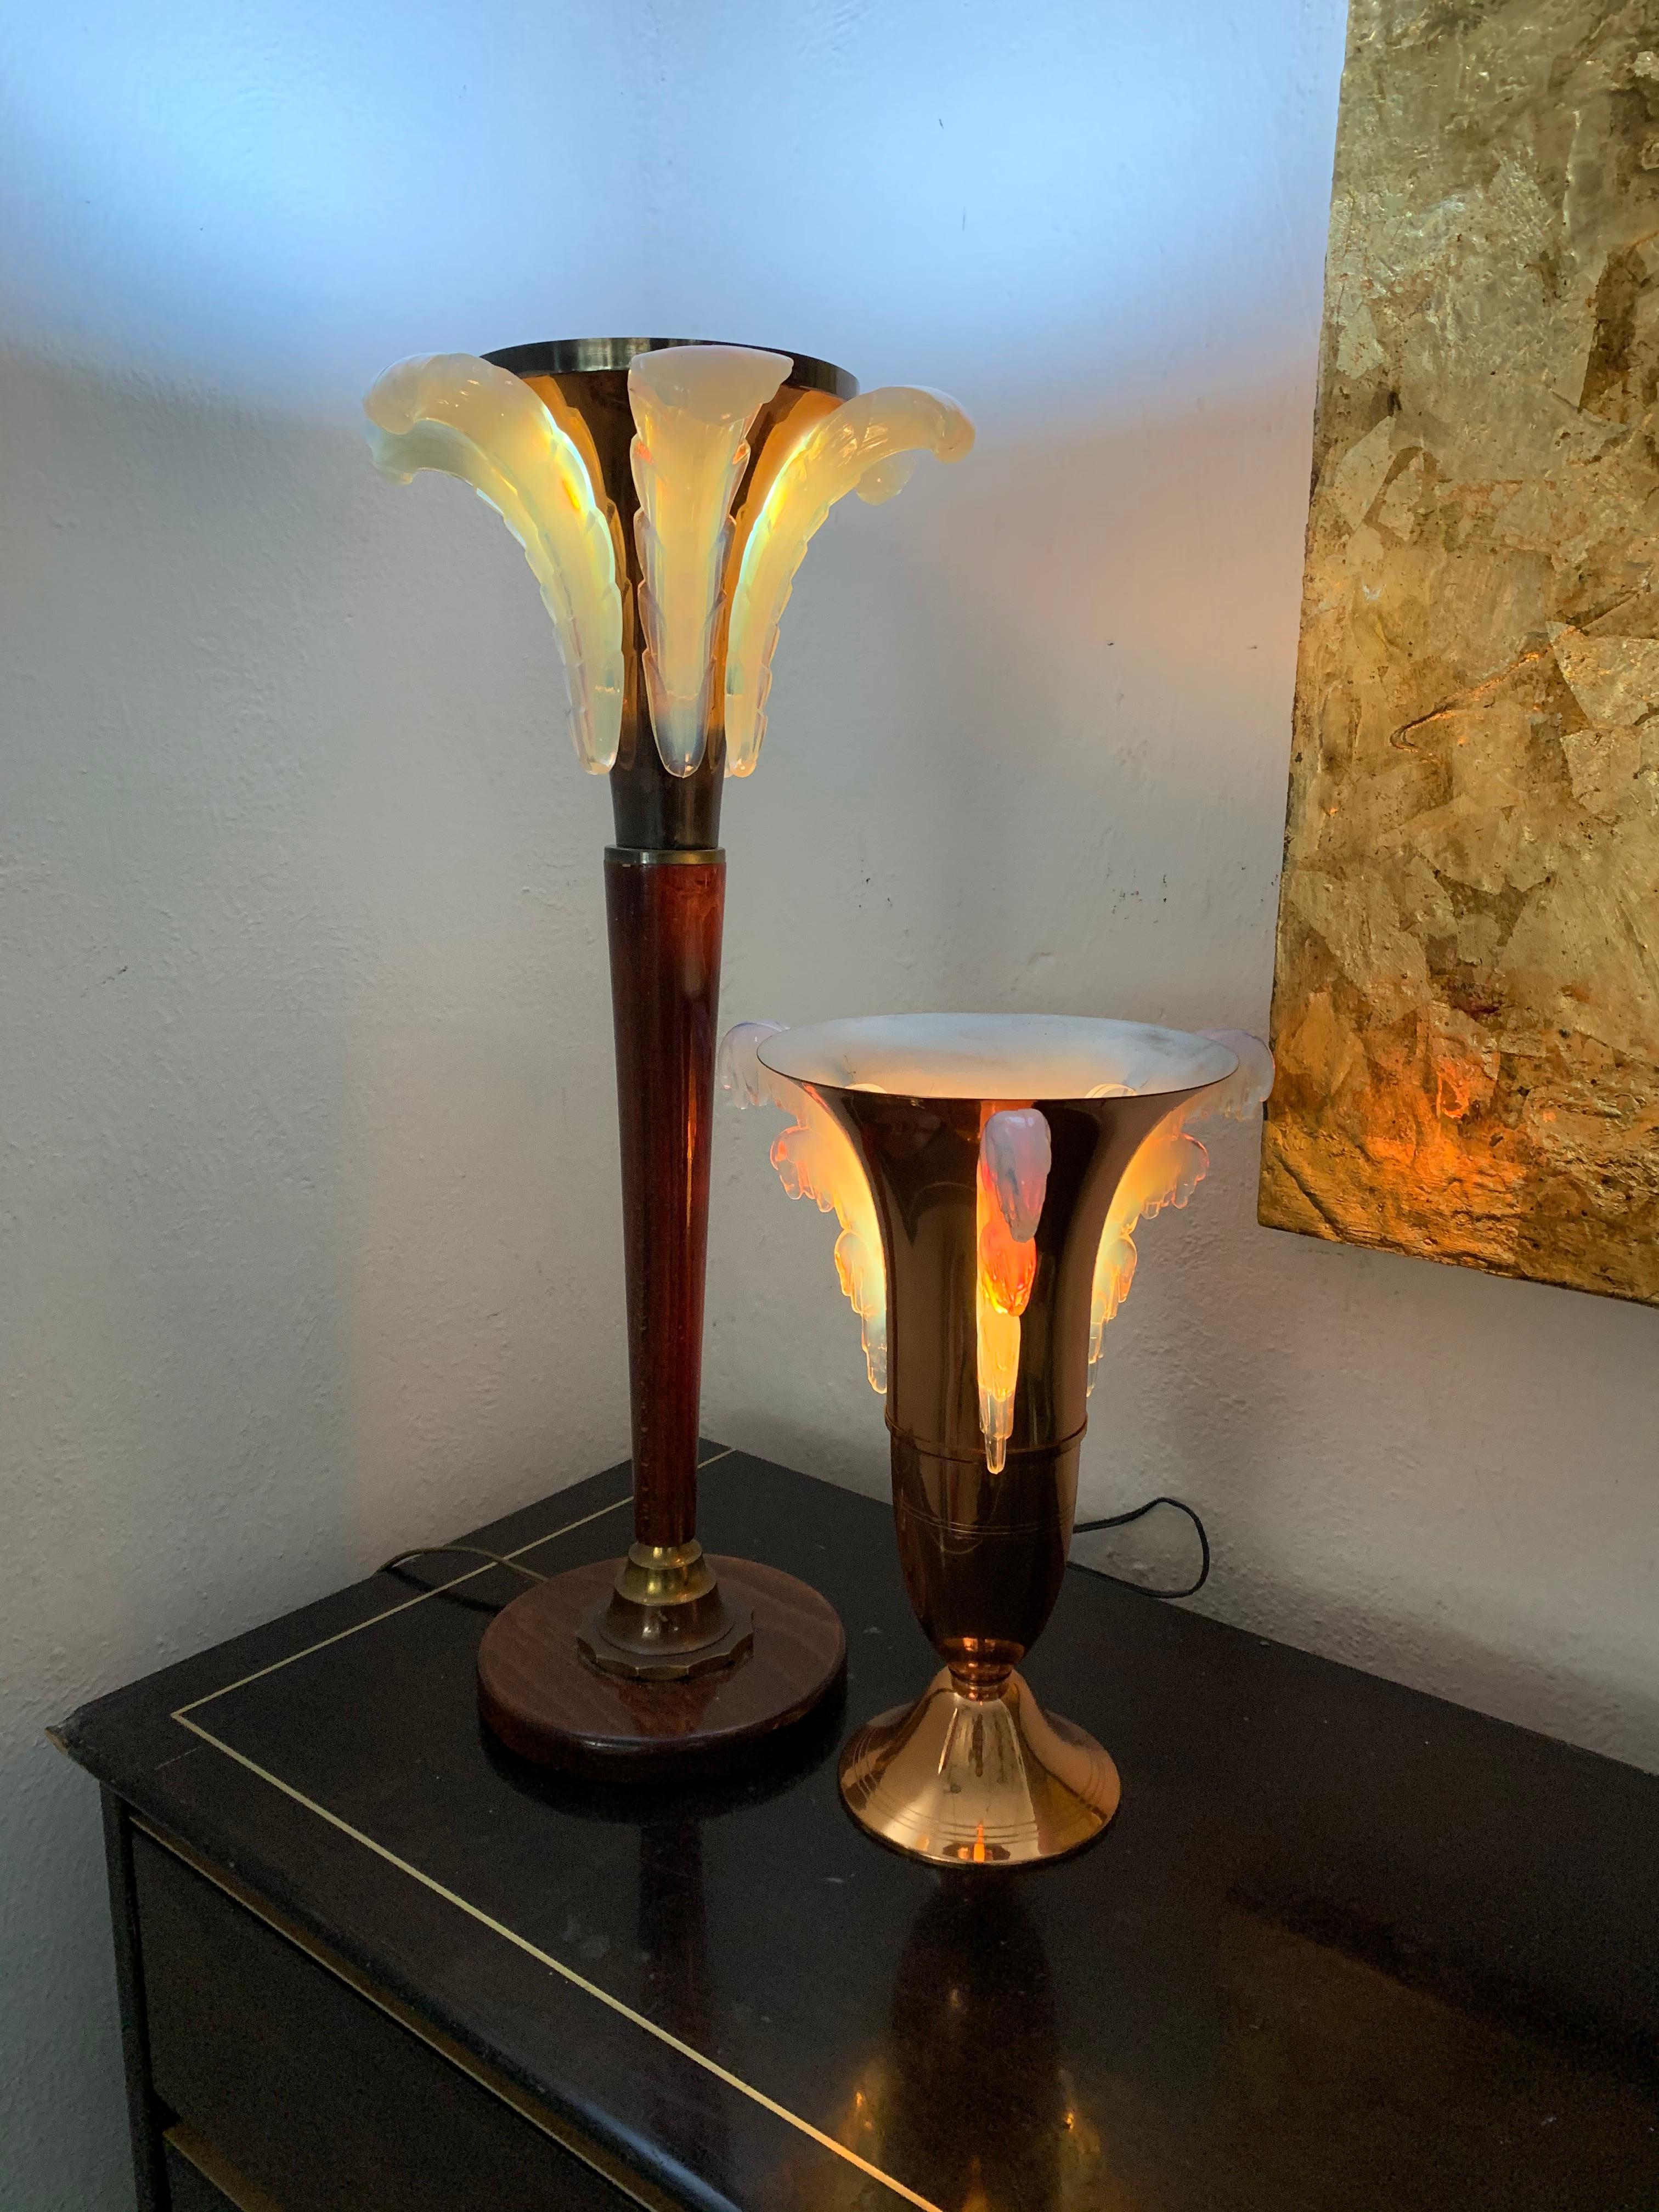 Copper Art Deco Table Lamp Attributed to Petitot, Glass Signed EZAN, France circa 1940s